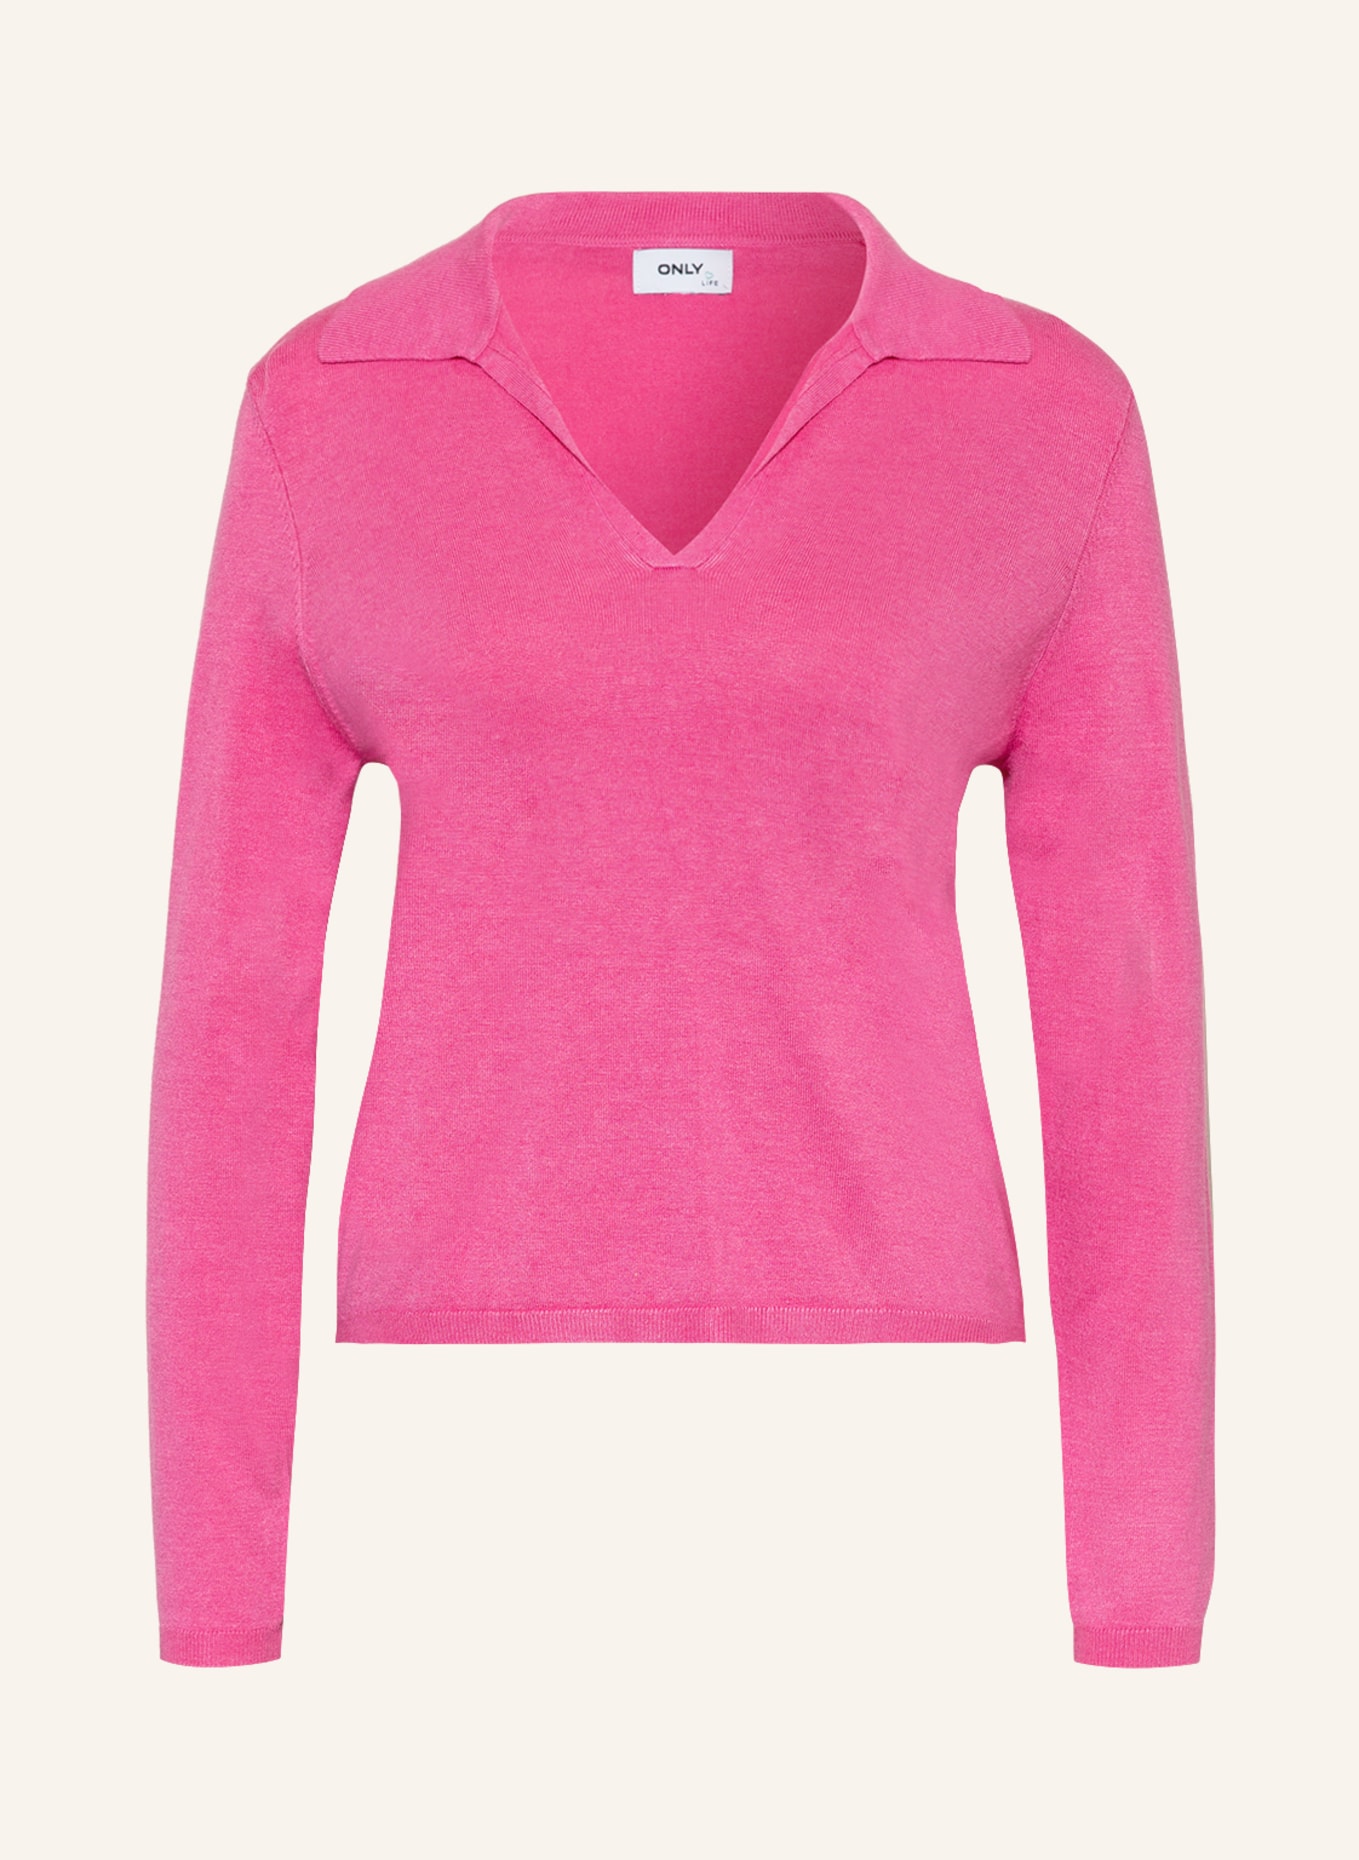 ONLY Pullover, Farbe: PINK (Bild 1)